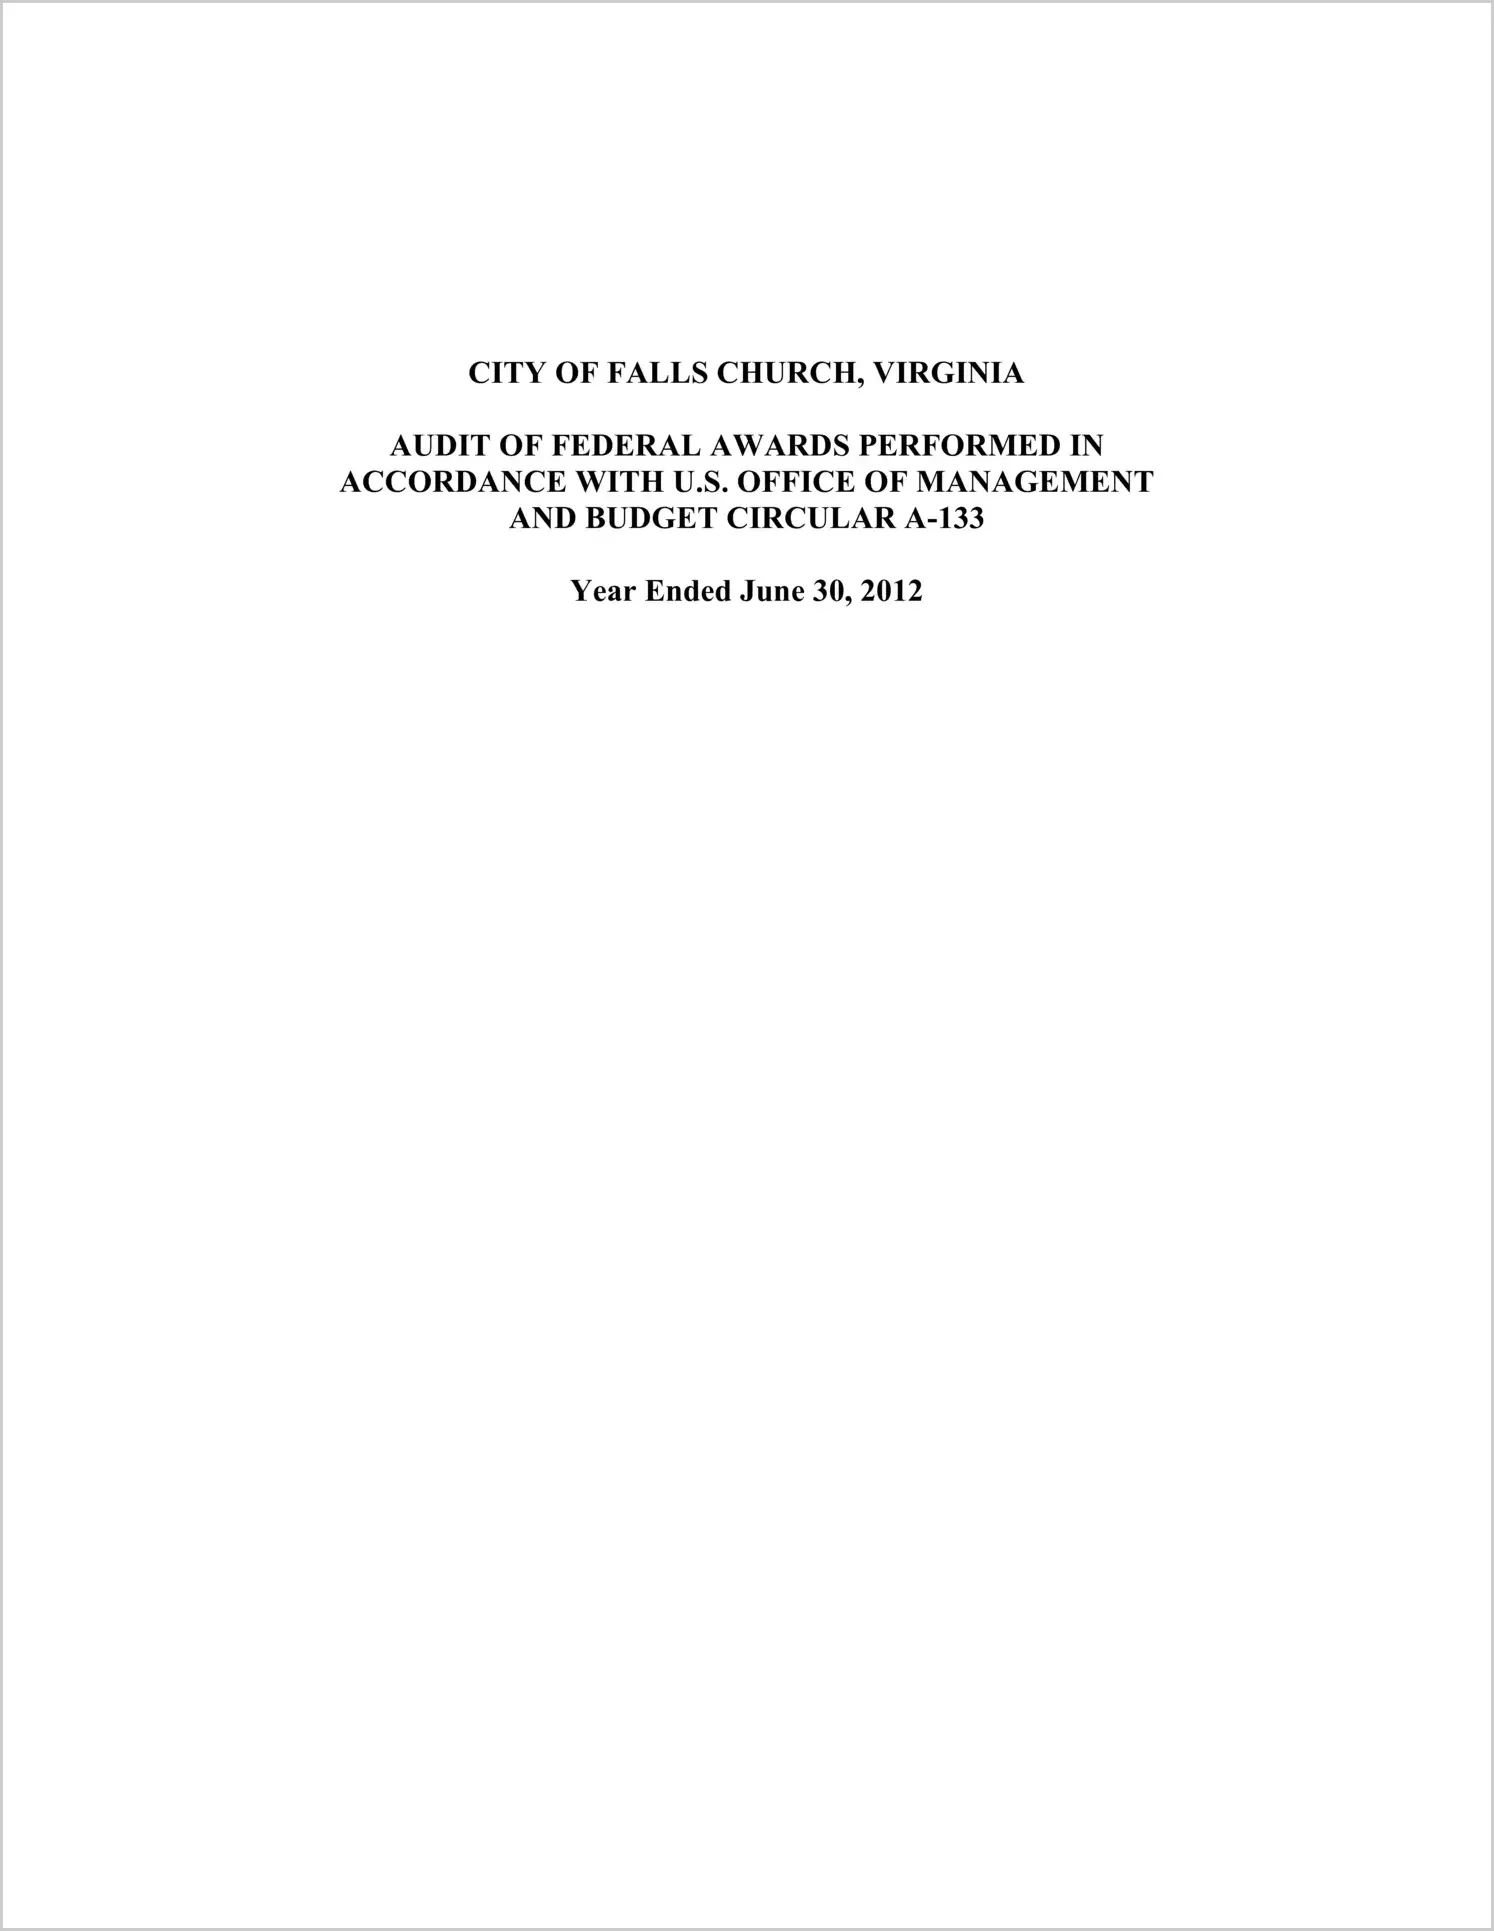 2012 Internal Control and Compliance Report for City of Falls Church